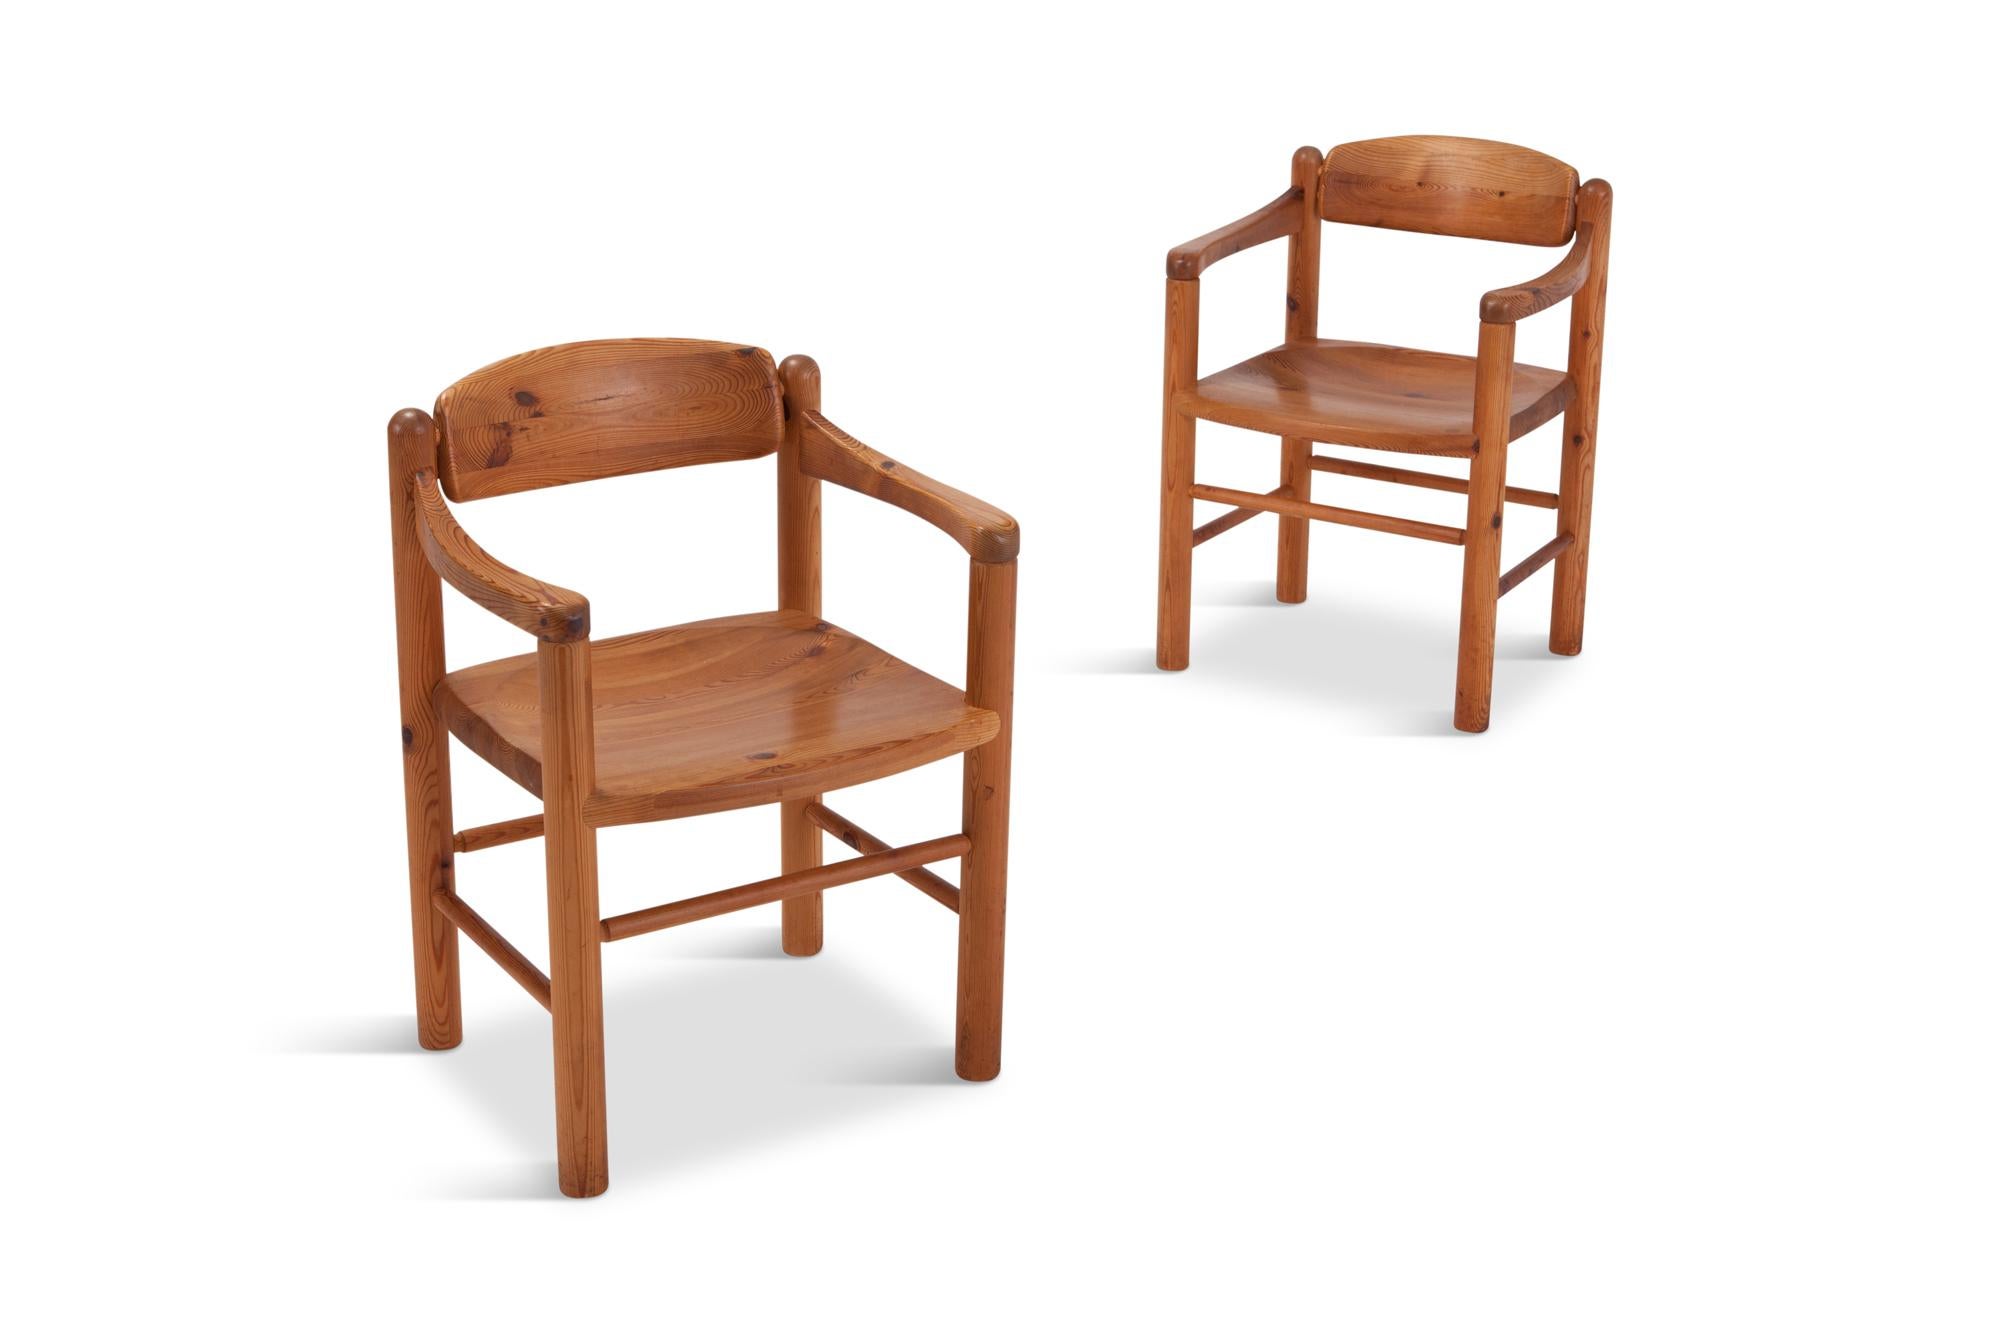 Mid-Century Modern solid pine dining chairs by Rainer Duamiller set of six, Denmark, 1970s
The solid construction of this chair gives them a very strong expression,
and have a strong resemblance with the design of Charlotte Perriand and Pierre